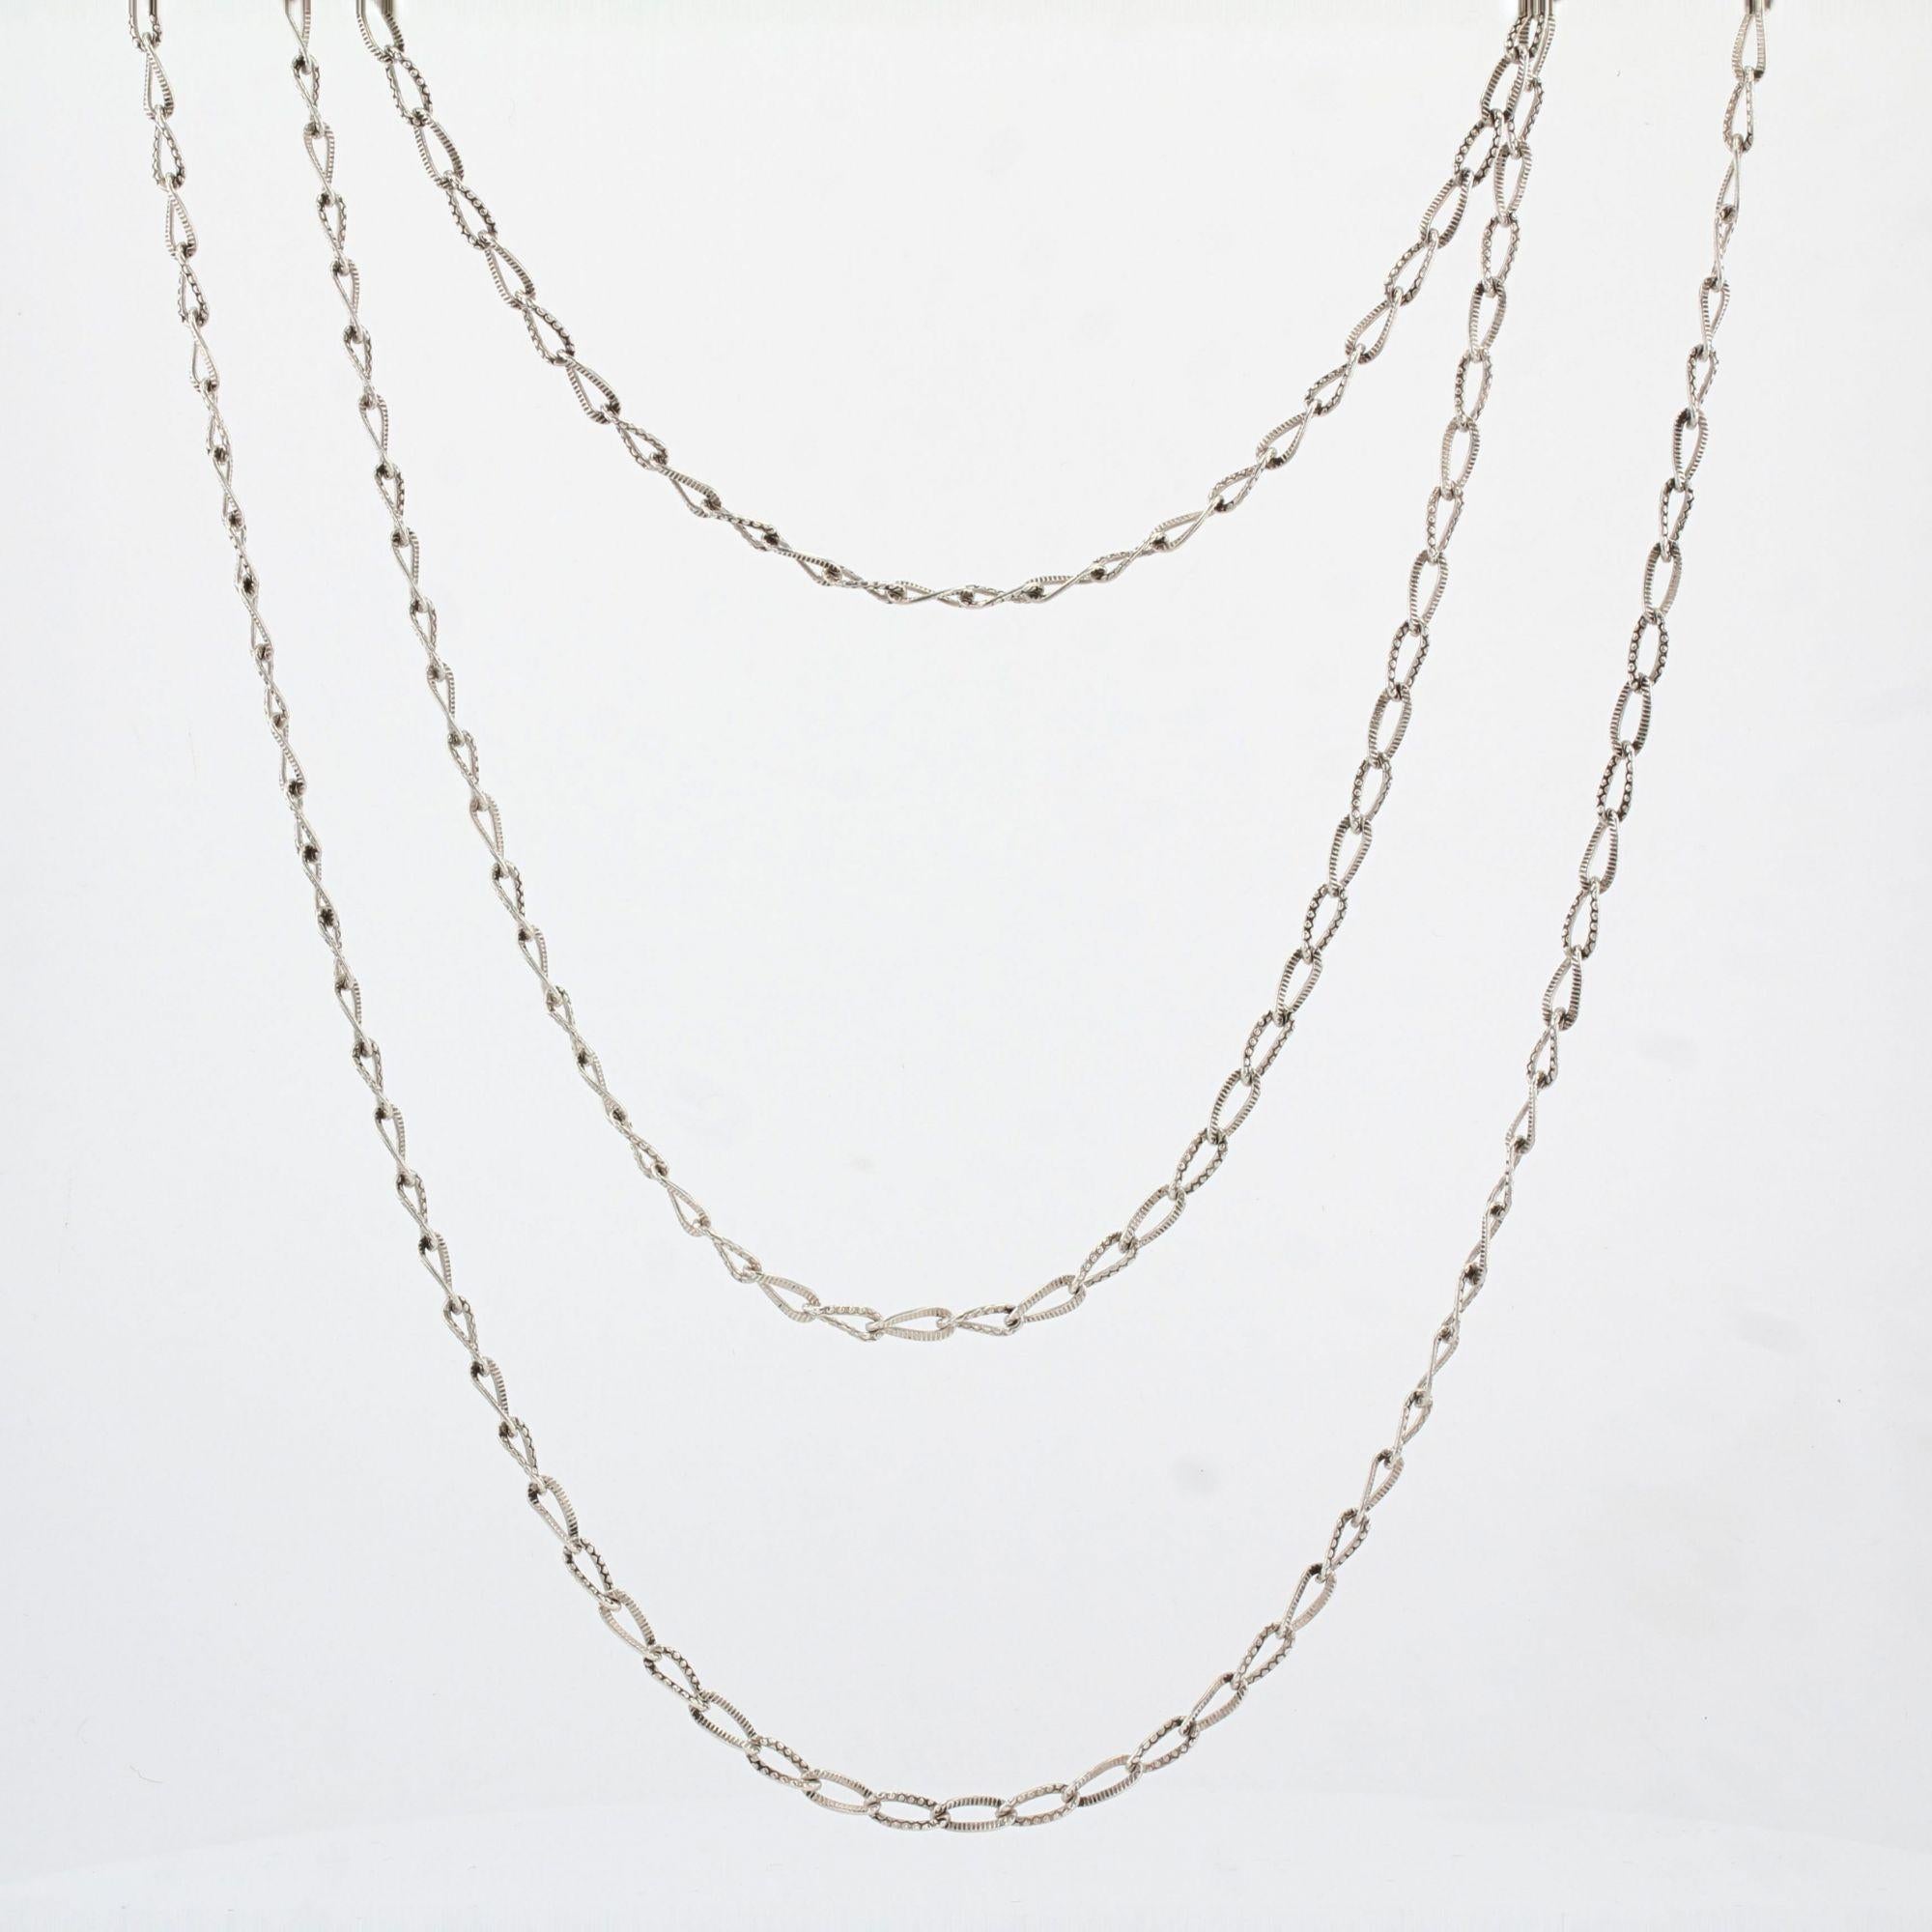 1900s Chiseled Silver Long Chain Necklace For Sale 1